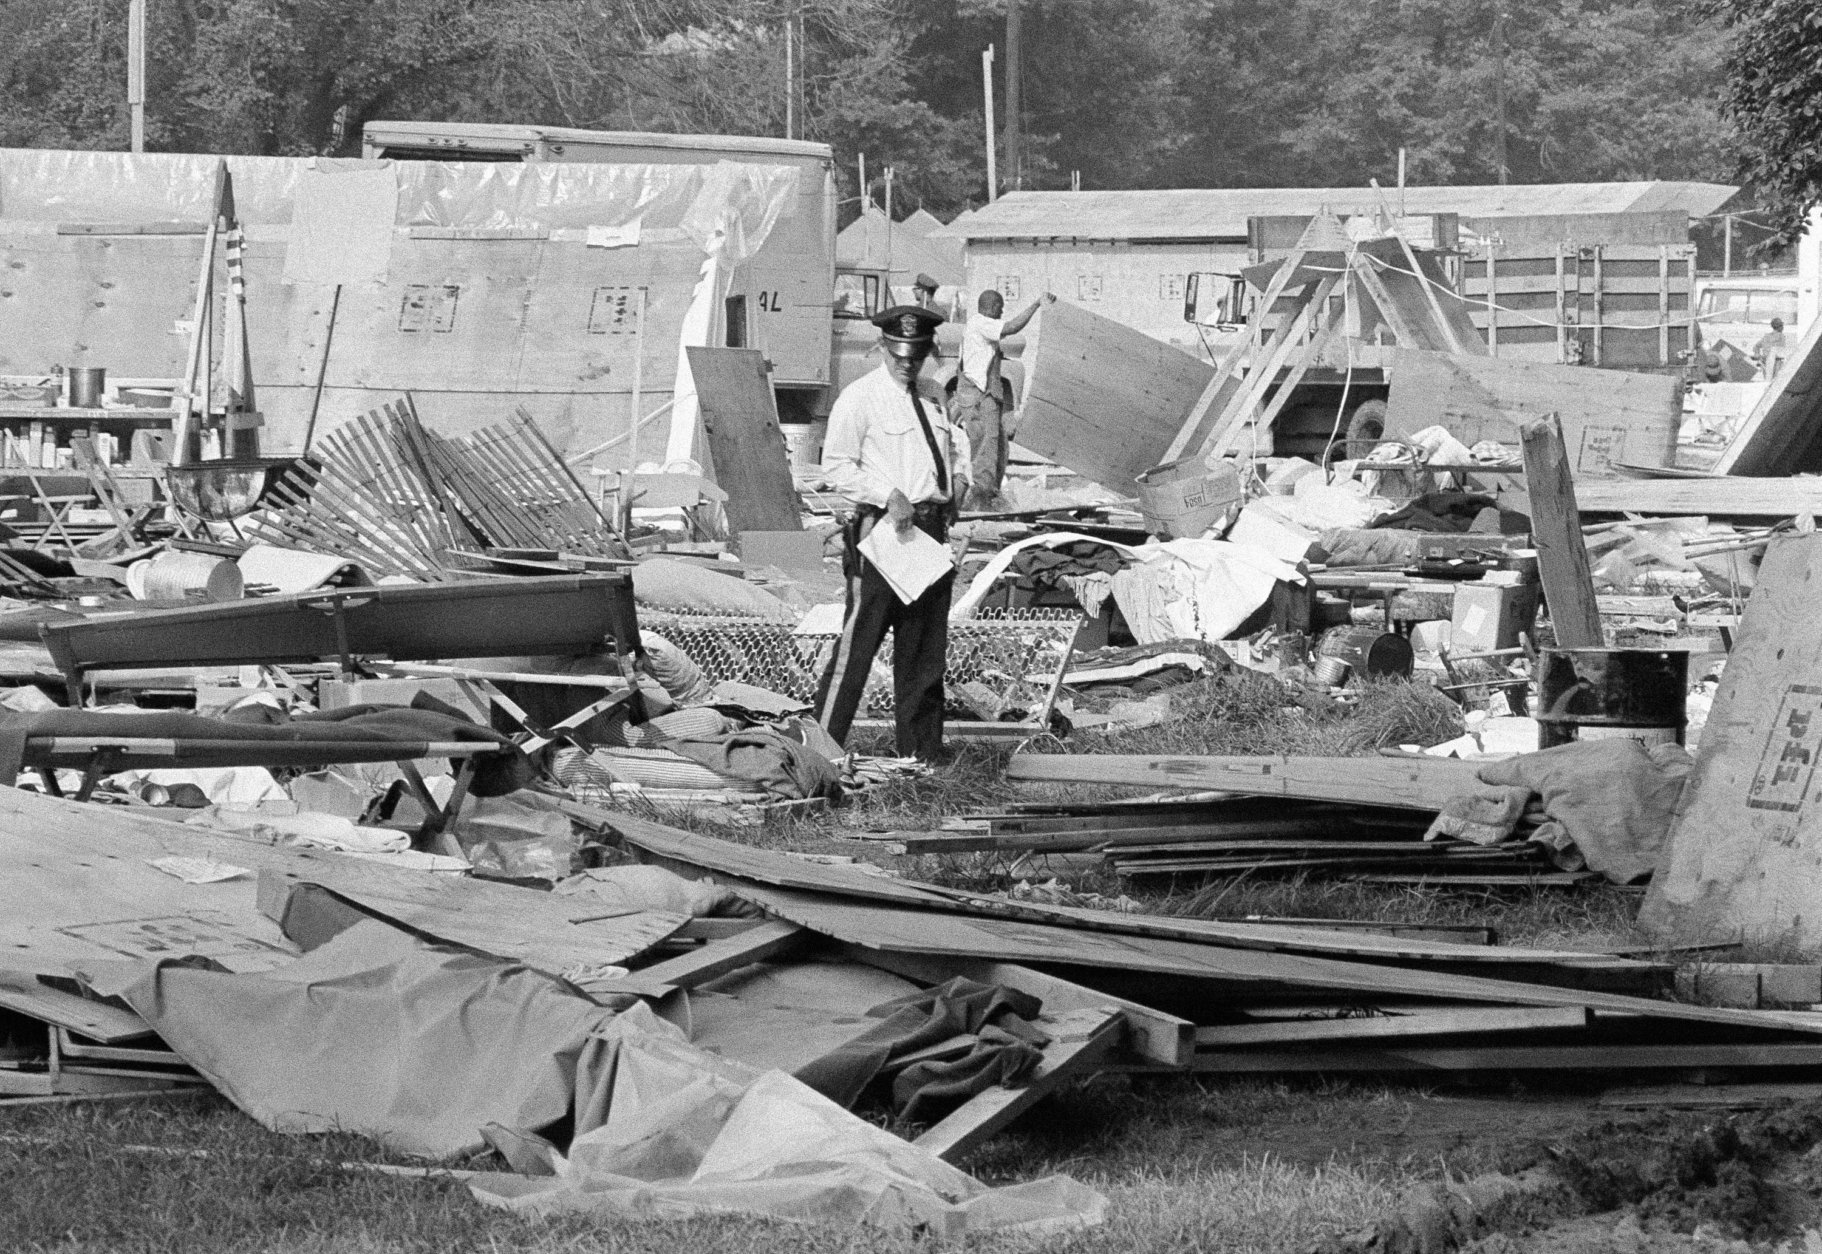 The possessions of former residents of Resurrection City are left on the flooring as the plywood and plastic shanties of the Poor Peoples Campaign are dismantled by workmen, June 25, 1968. Plywood sections are being loaded on trucks to be carted away. The possessions will be cataloged by tent and stored. (AP Photo/Bob Daugherty)